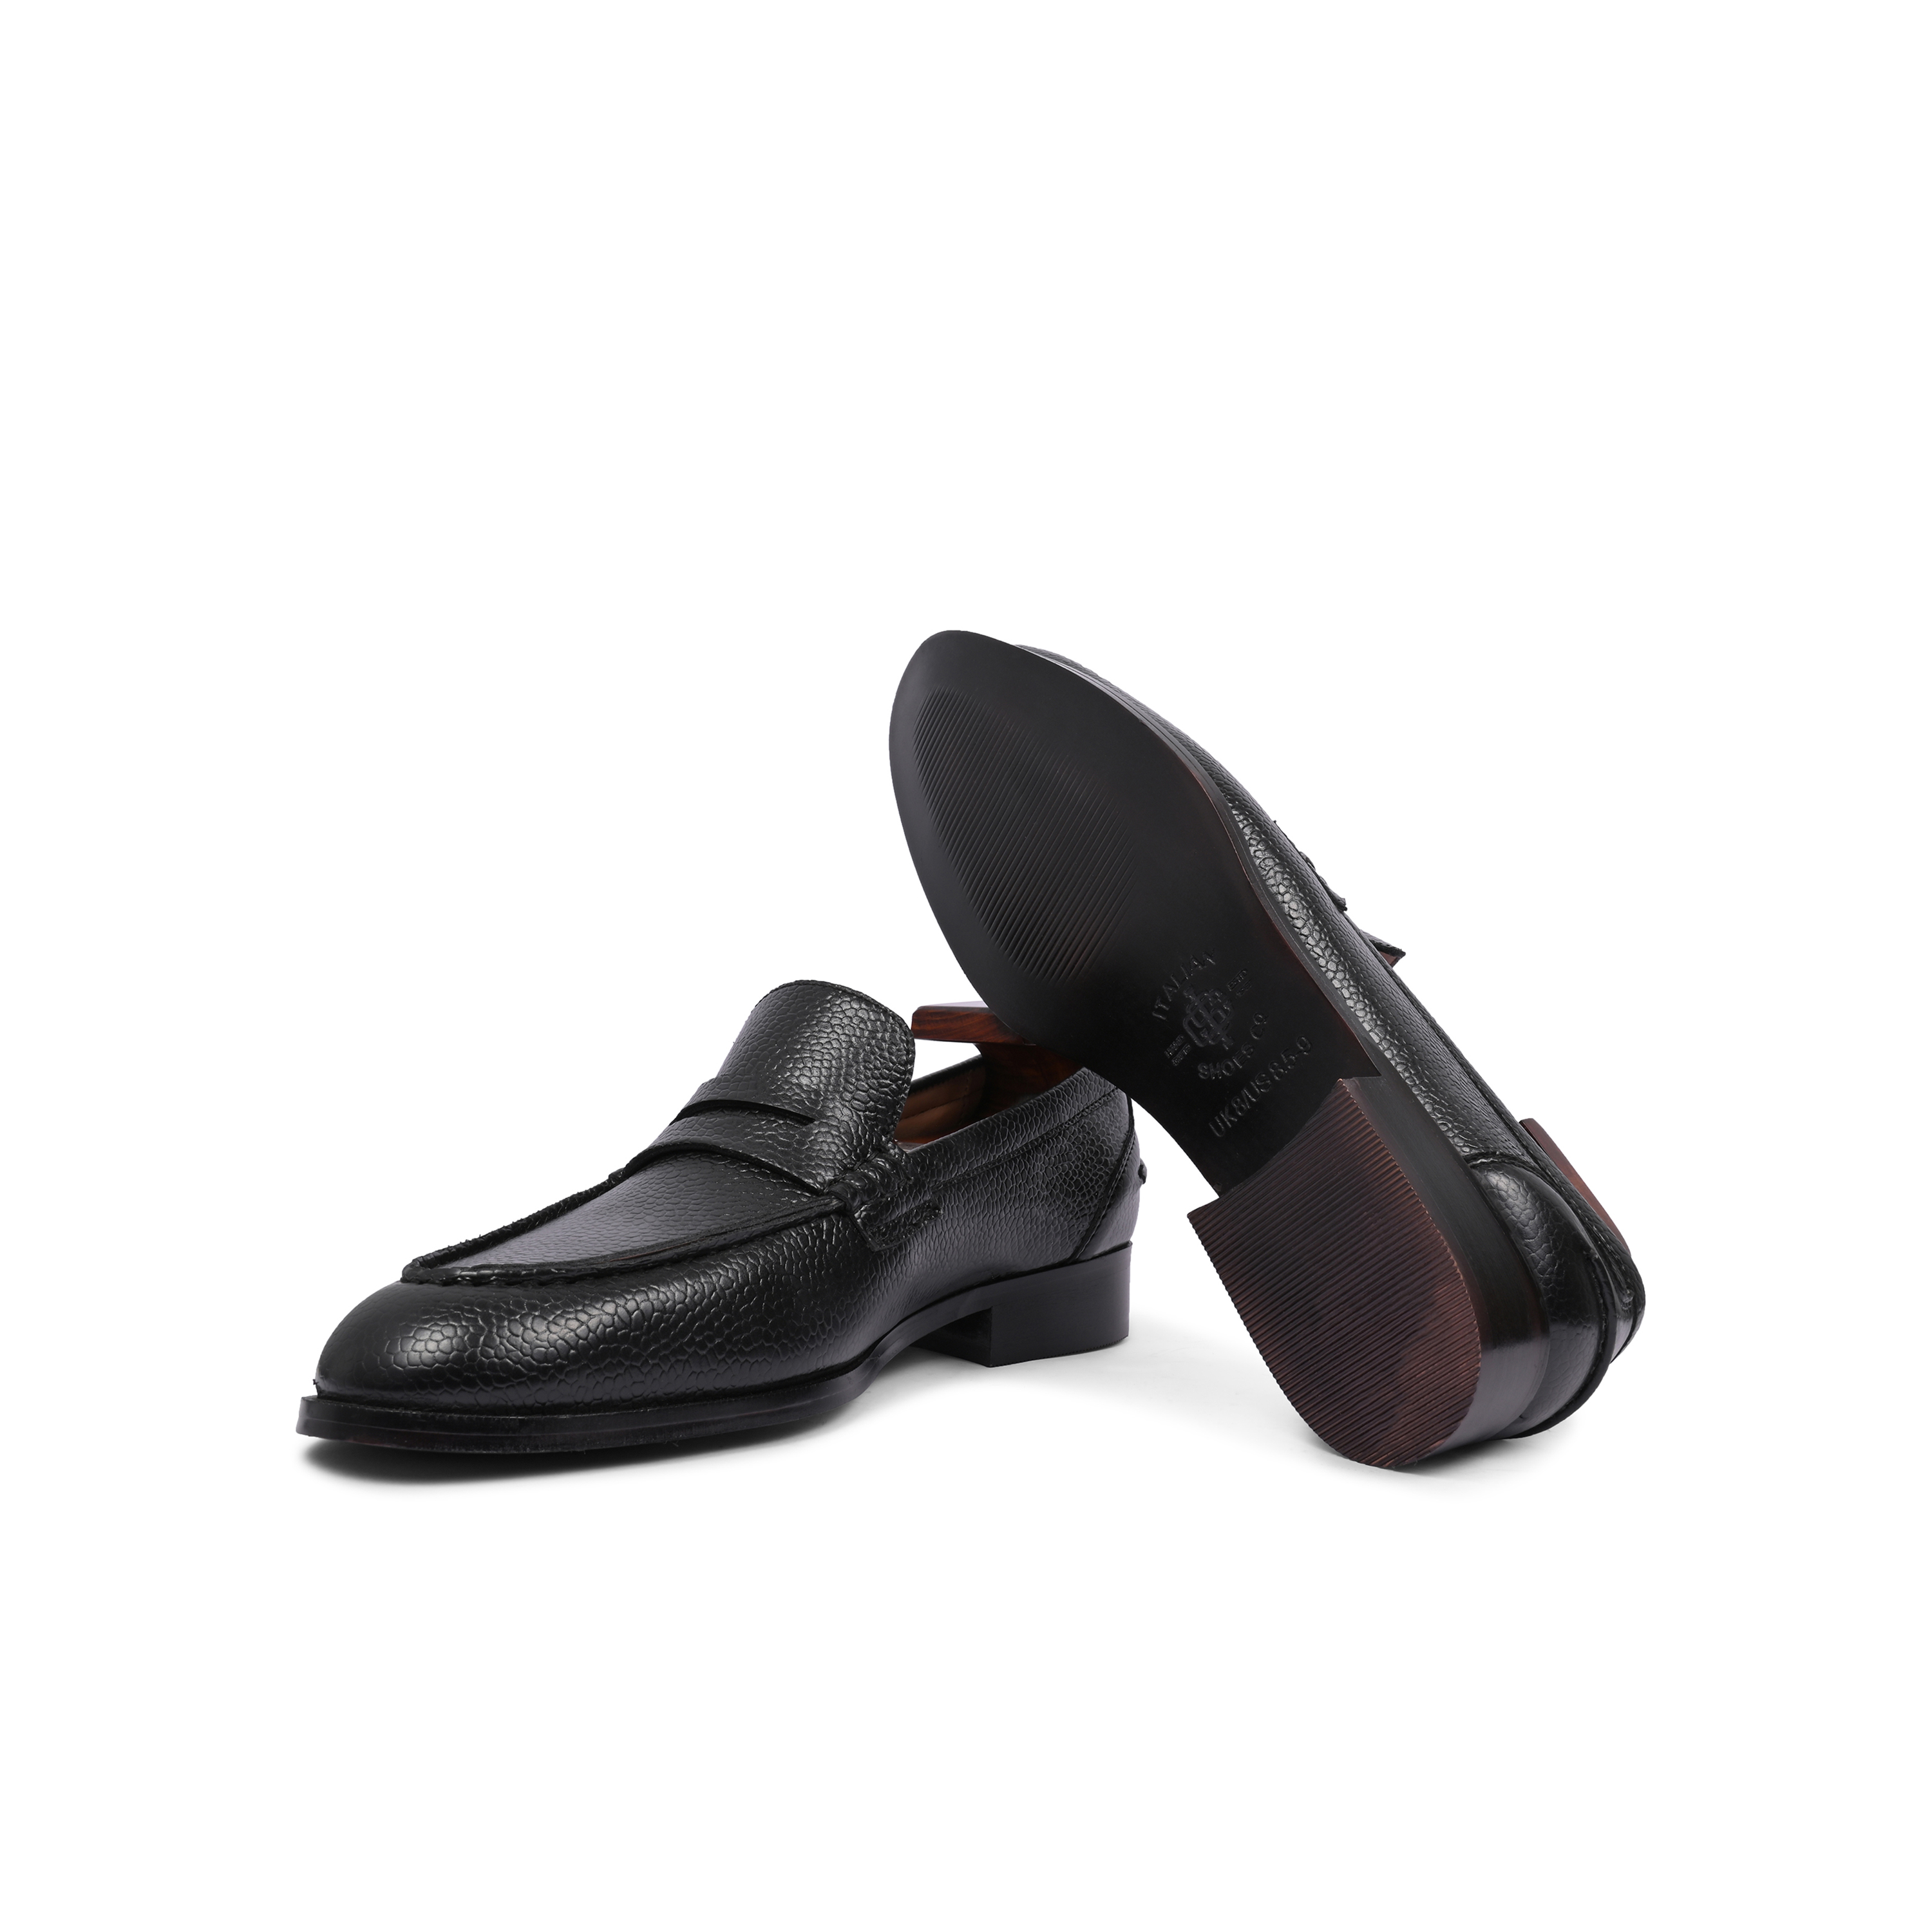 UrbanSole Loafers Shoes